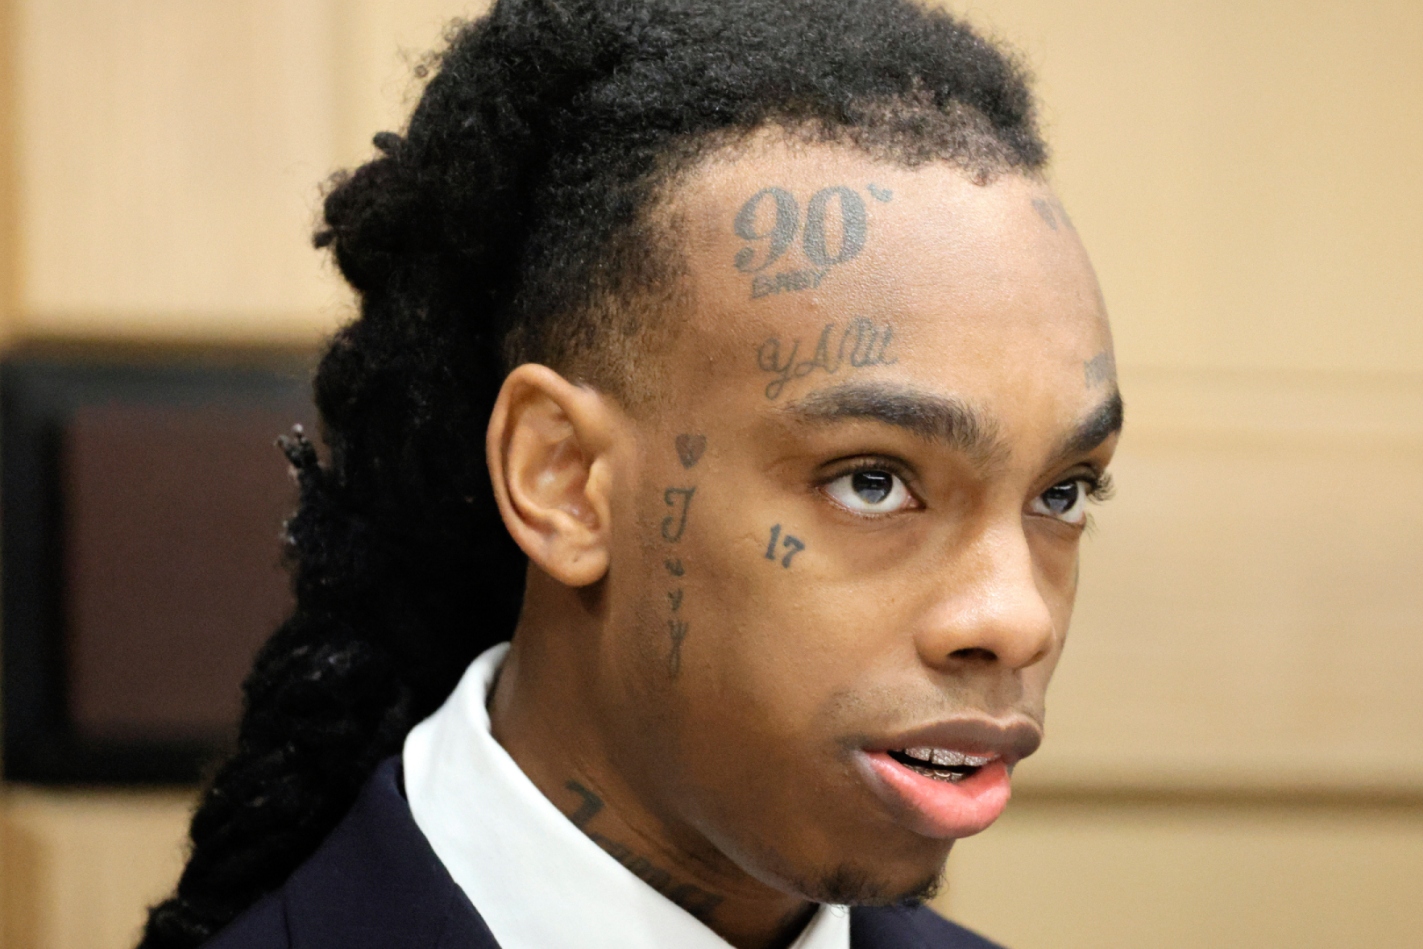 YNW Melly Stuck In Waiting Game; Victimâ€™s Mom Urges Judge To Deny Bond #YNWMelly